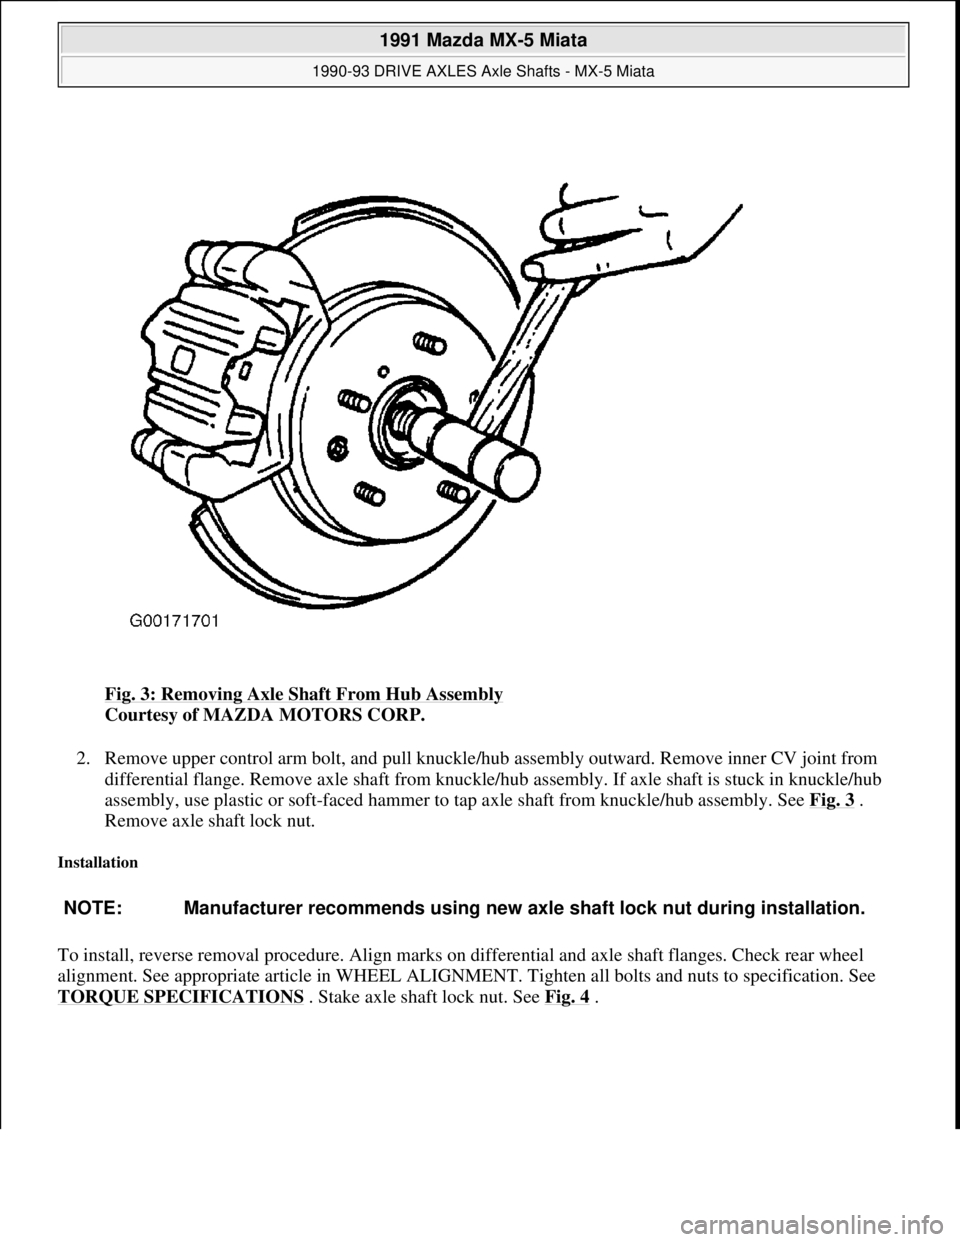 MAZDA MIATA 1991  Factory Service Manual Fig. 3: Removing Axle Shaft From Hub Assembly 
Courtesy of MAZDA MOTORS CORP. 
2. Remove upper control arm bolt, and pull knuckle/hub assembly outward. Remove inner CV joint from 
differential flange.